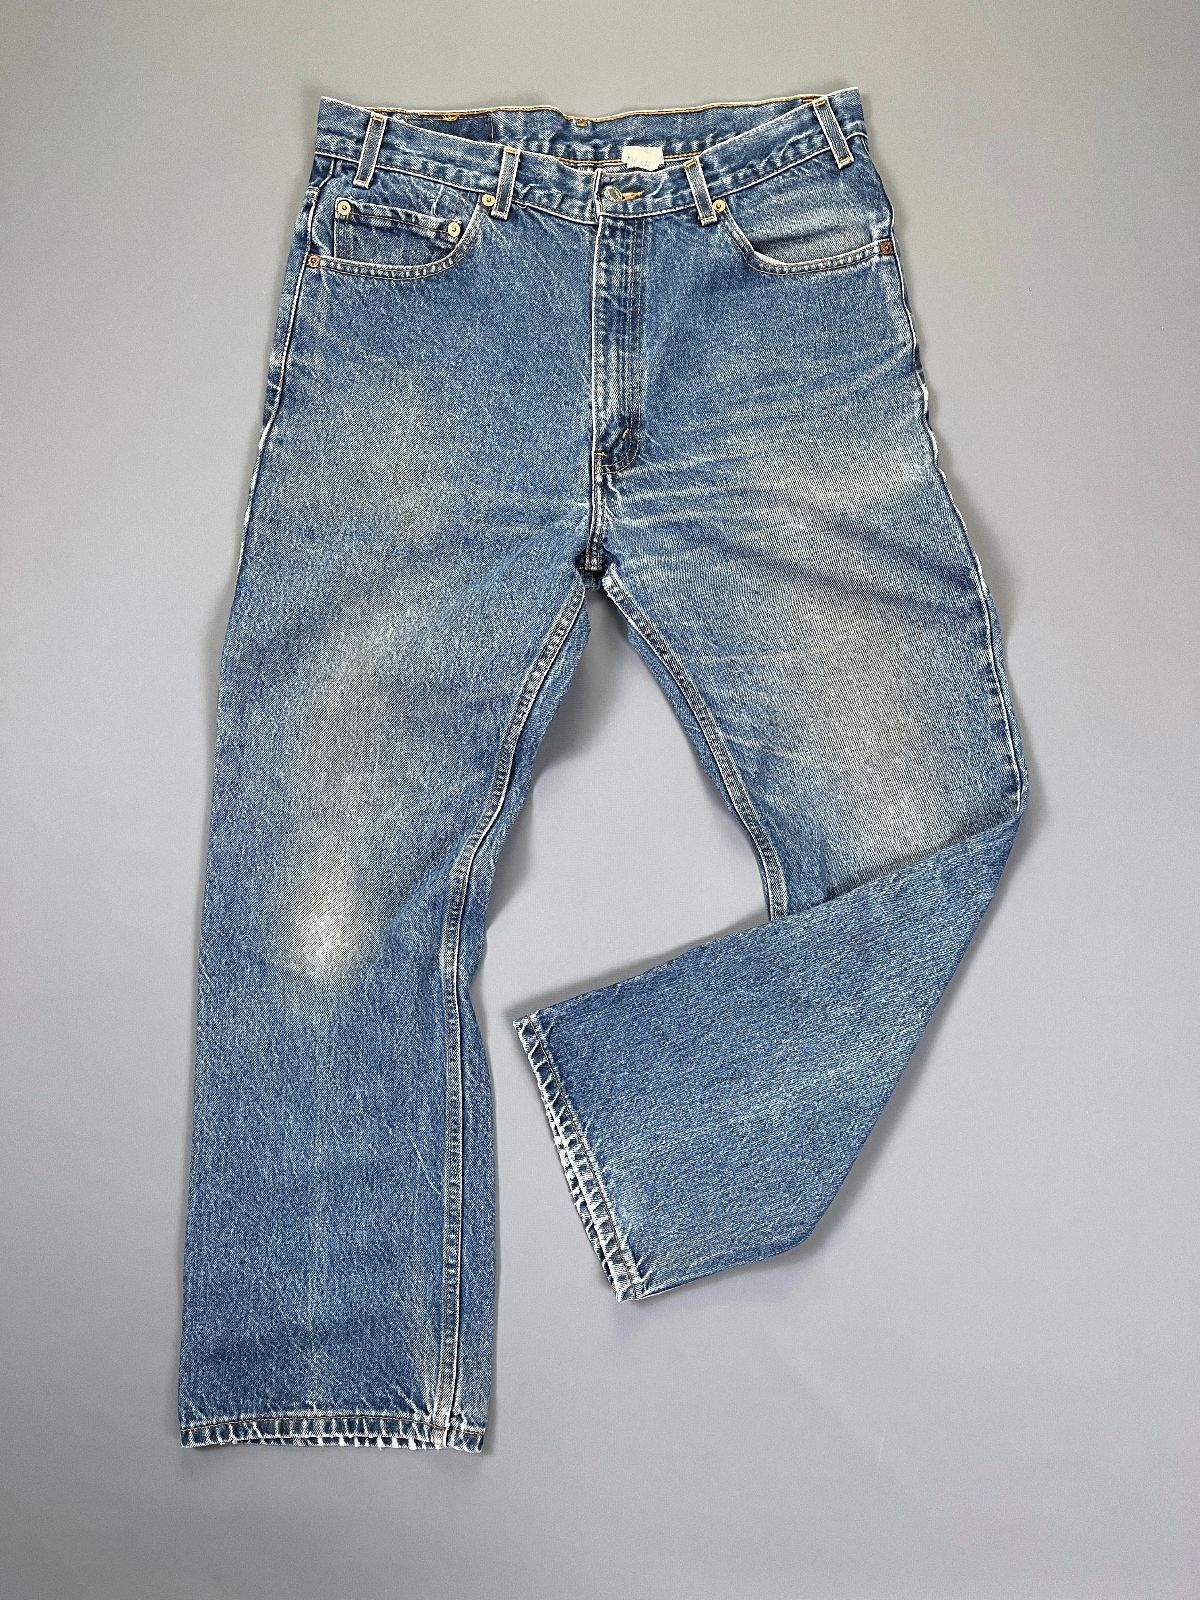 product details: LEVIS 517 CLASSIC WASH RED TAB ZIPPER FLY DENIM JEANS photo